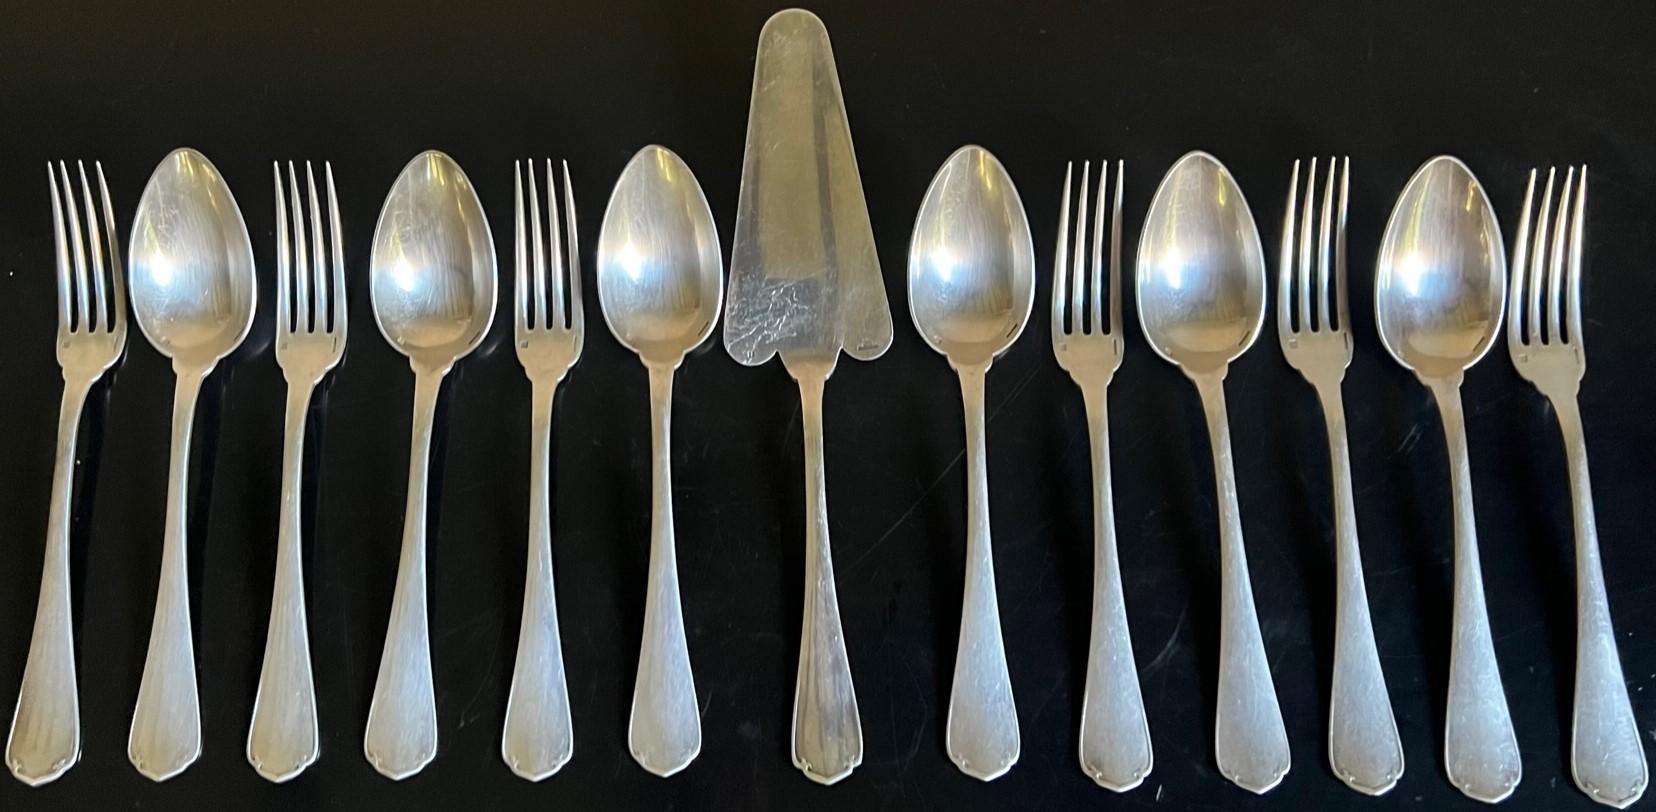 Christofle antique flatware set of six spoons and six forks as well as one vintage pie /cake server included. The spoons and forks were made in France in the early 1900's and the cake server around the 1940's.

Spoons- 8.25